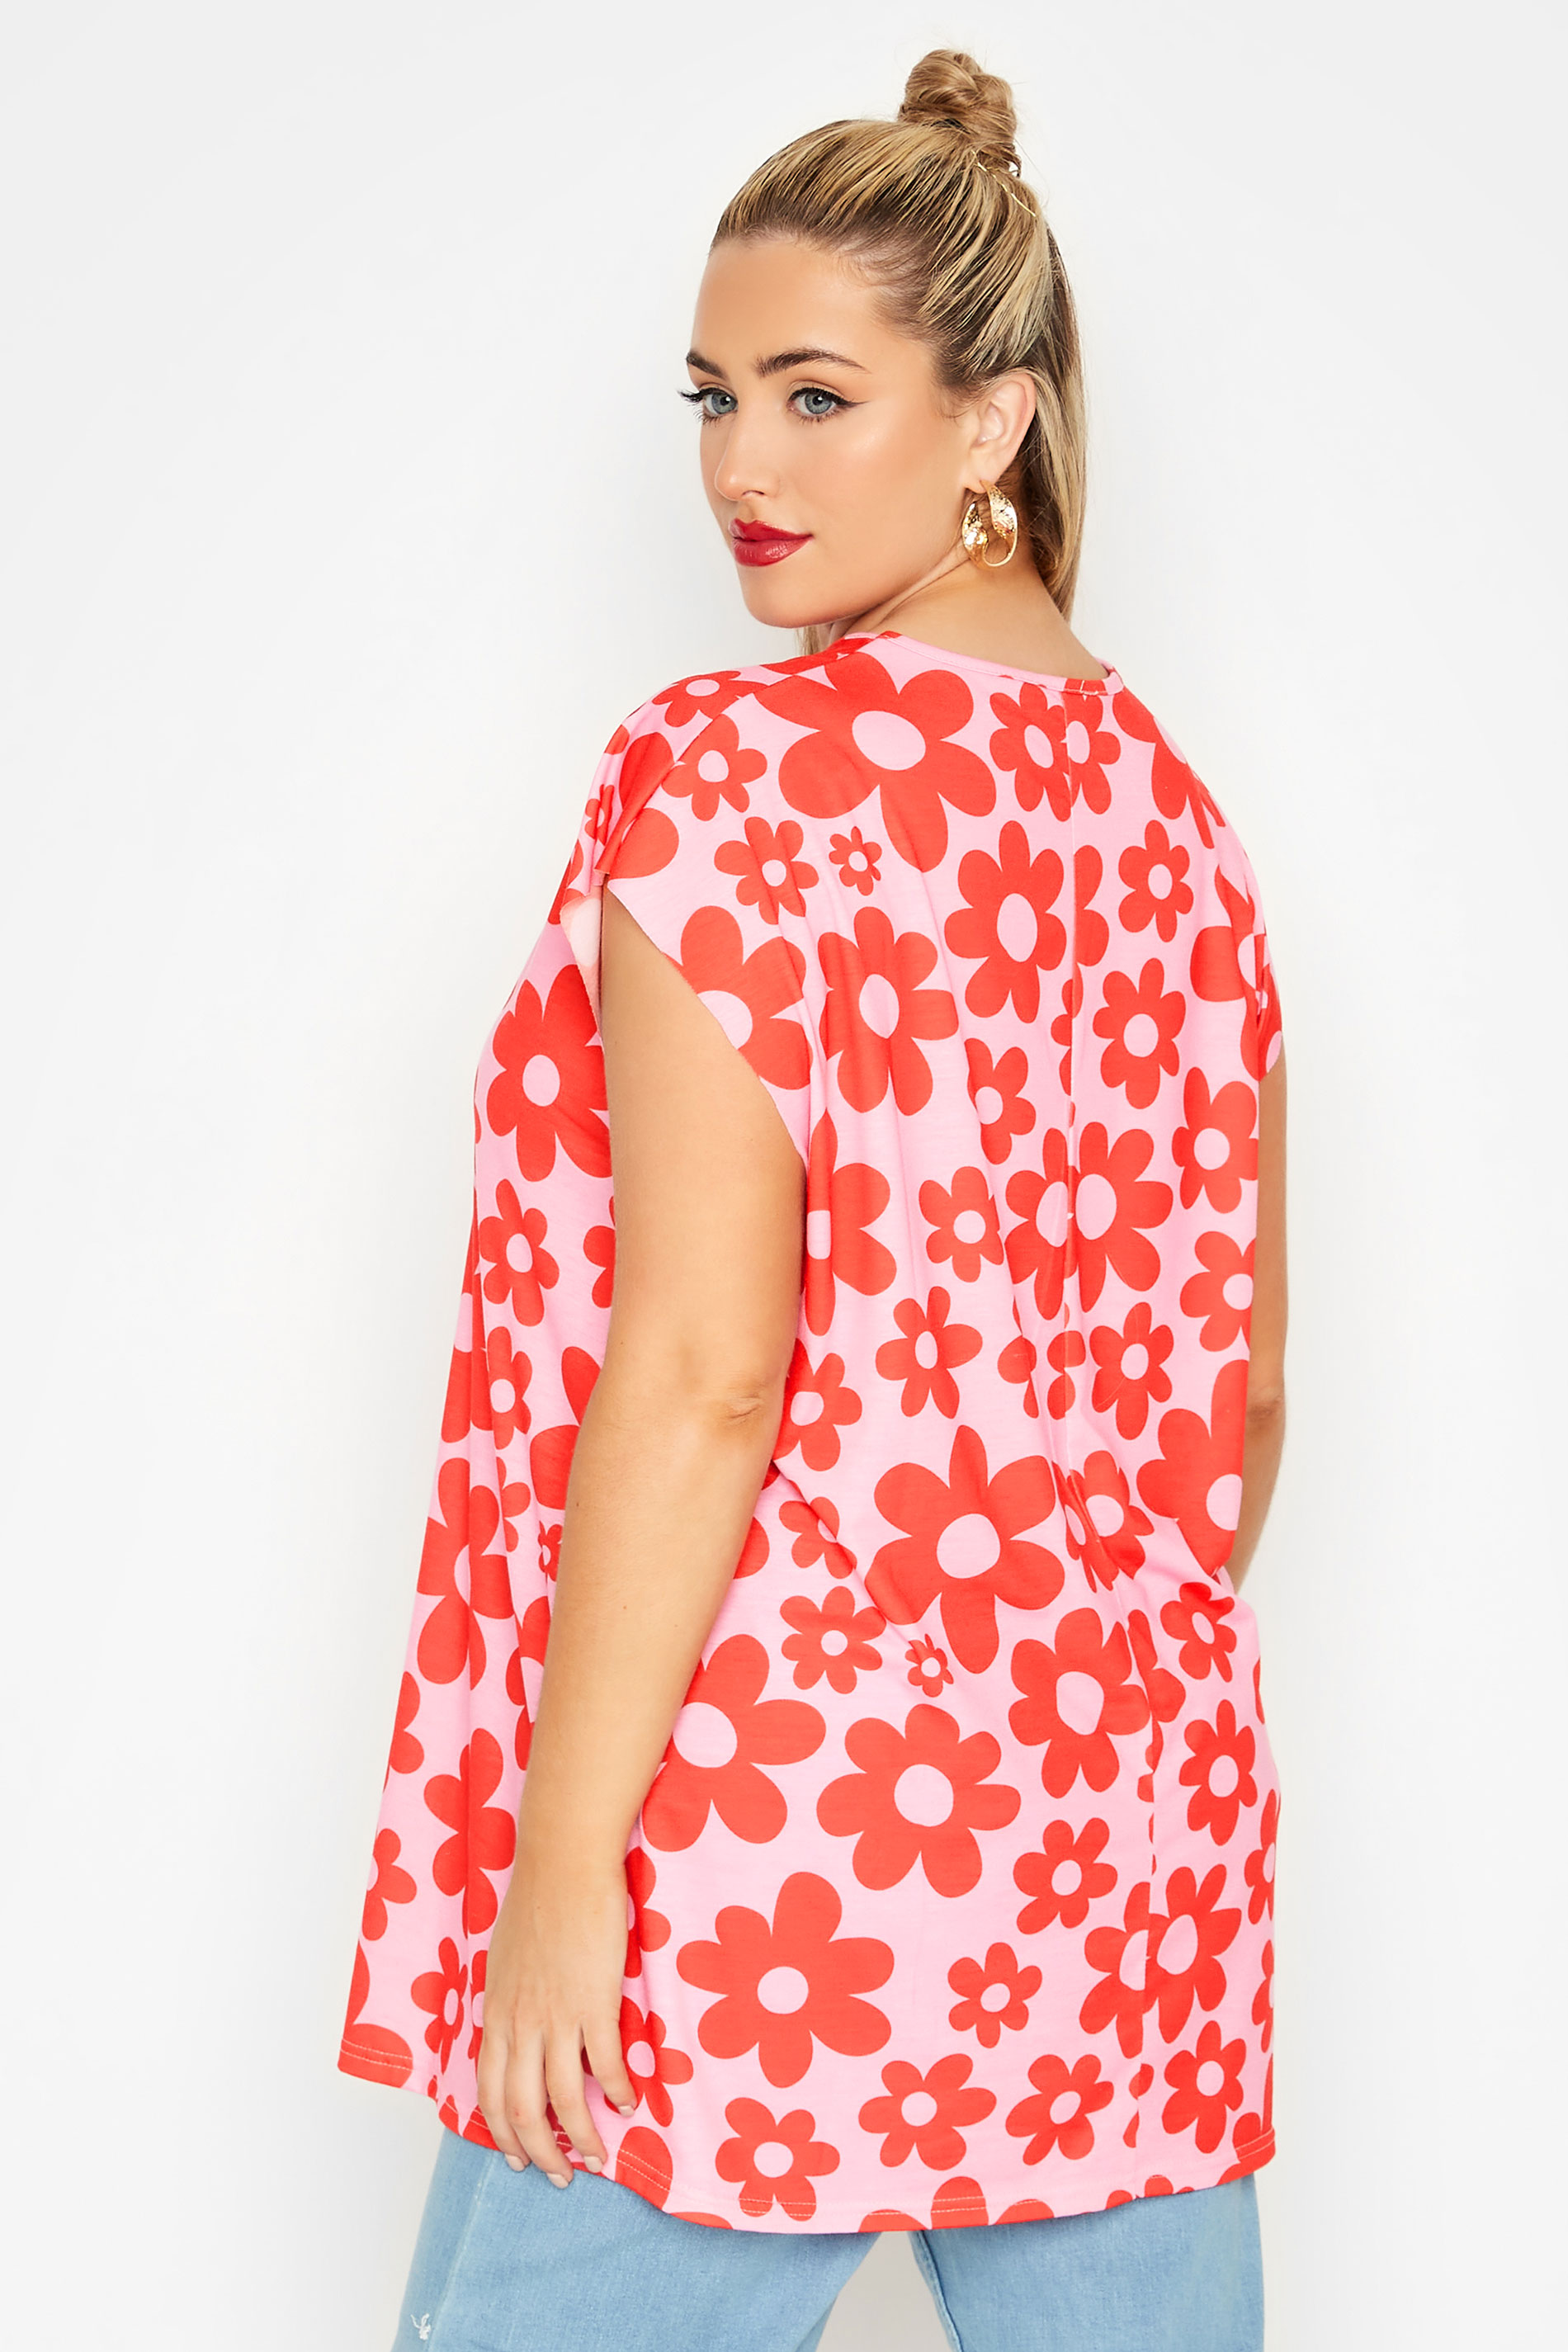 Grande taille  Tops Grande taille  Tops Jersey | LIMITED COLLECTION - T-Shirt Rétro Rose Floral Rouge - YW85547